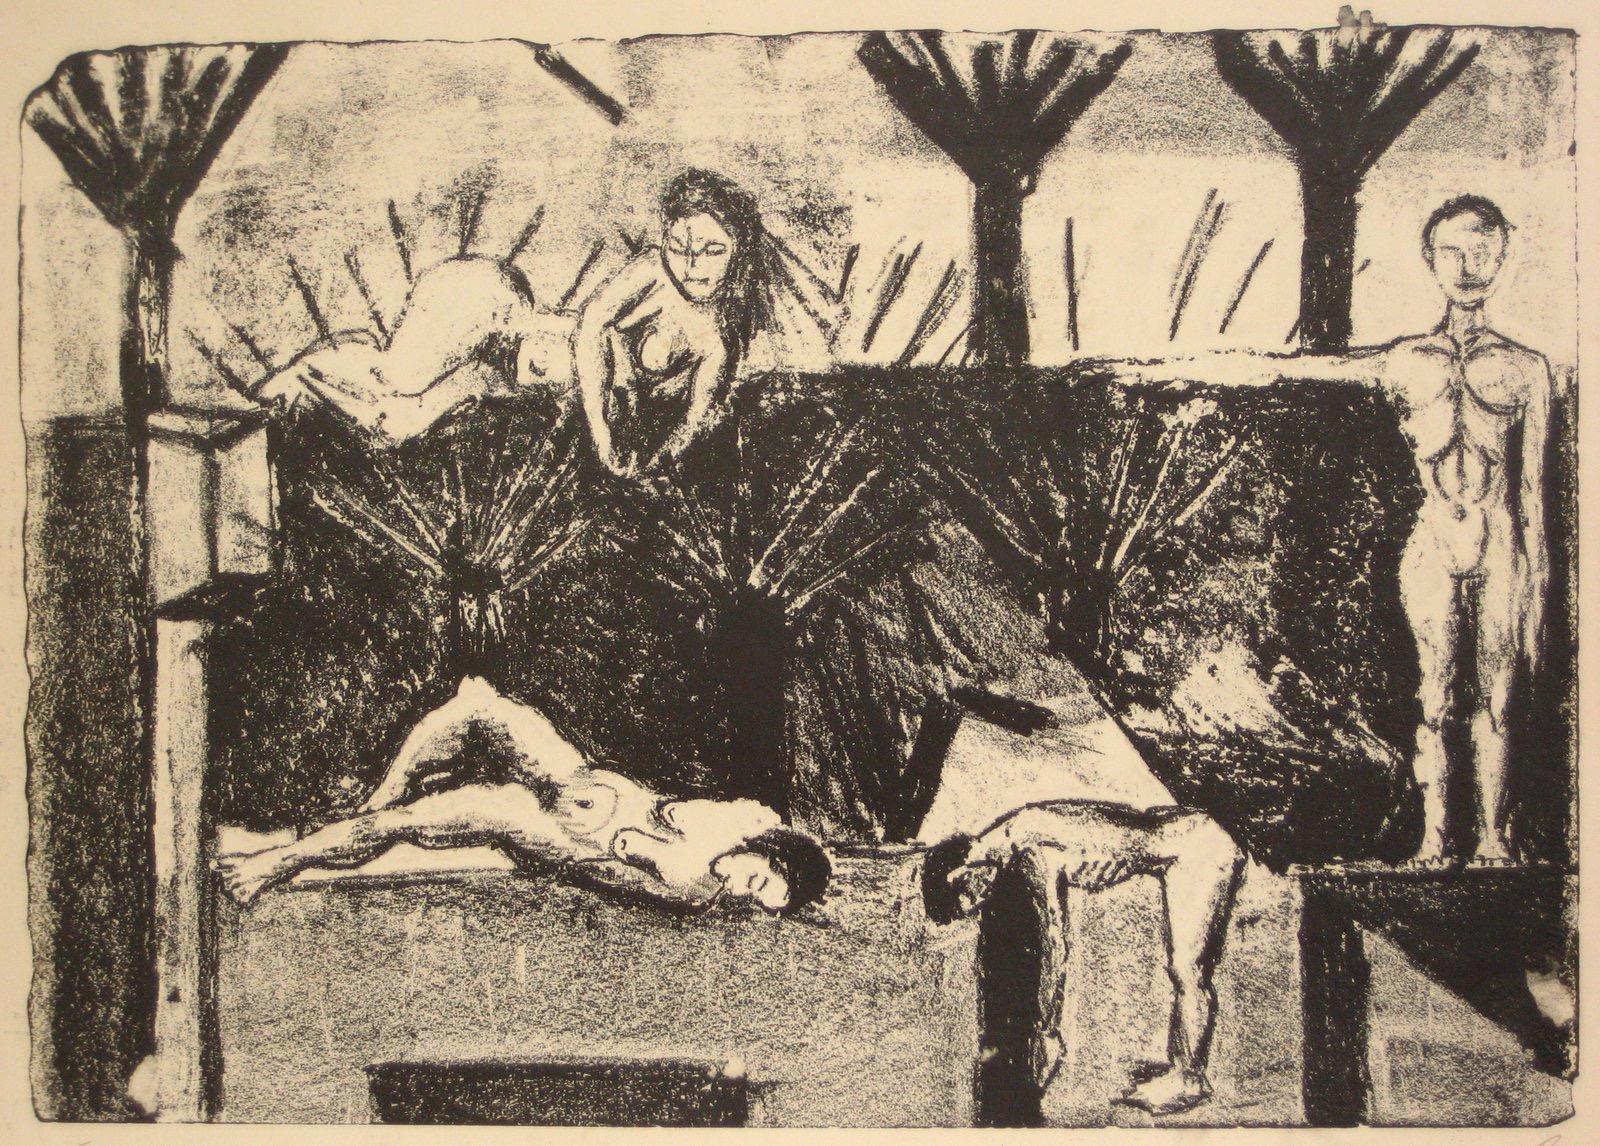 Ross Curtis Nude Print - "Four Figures" 1940-70s Nude Lithograph